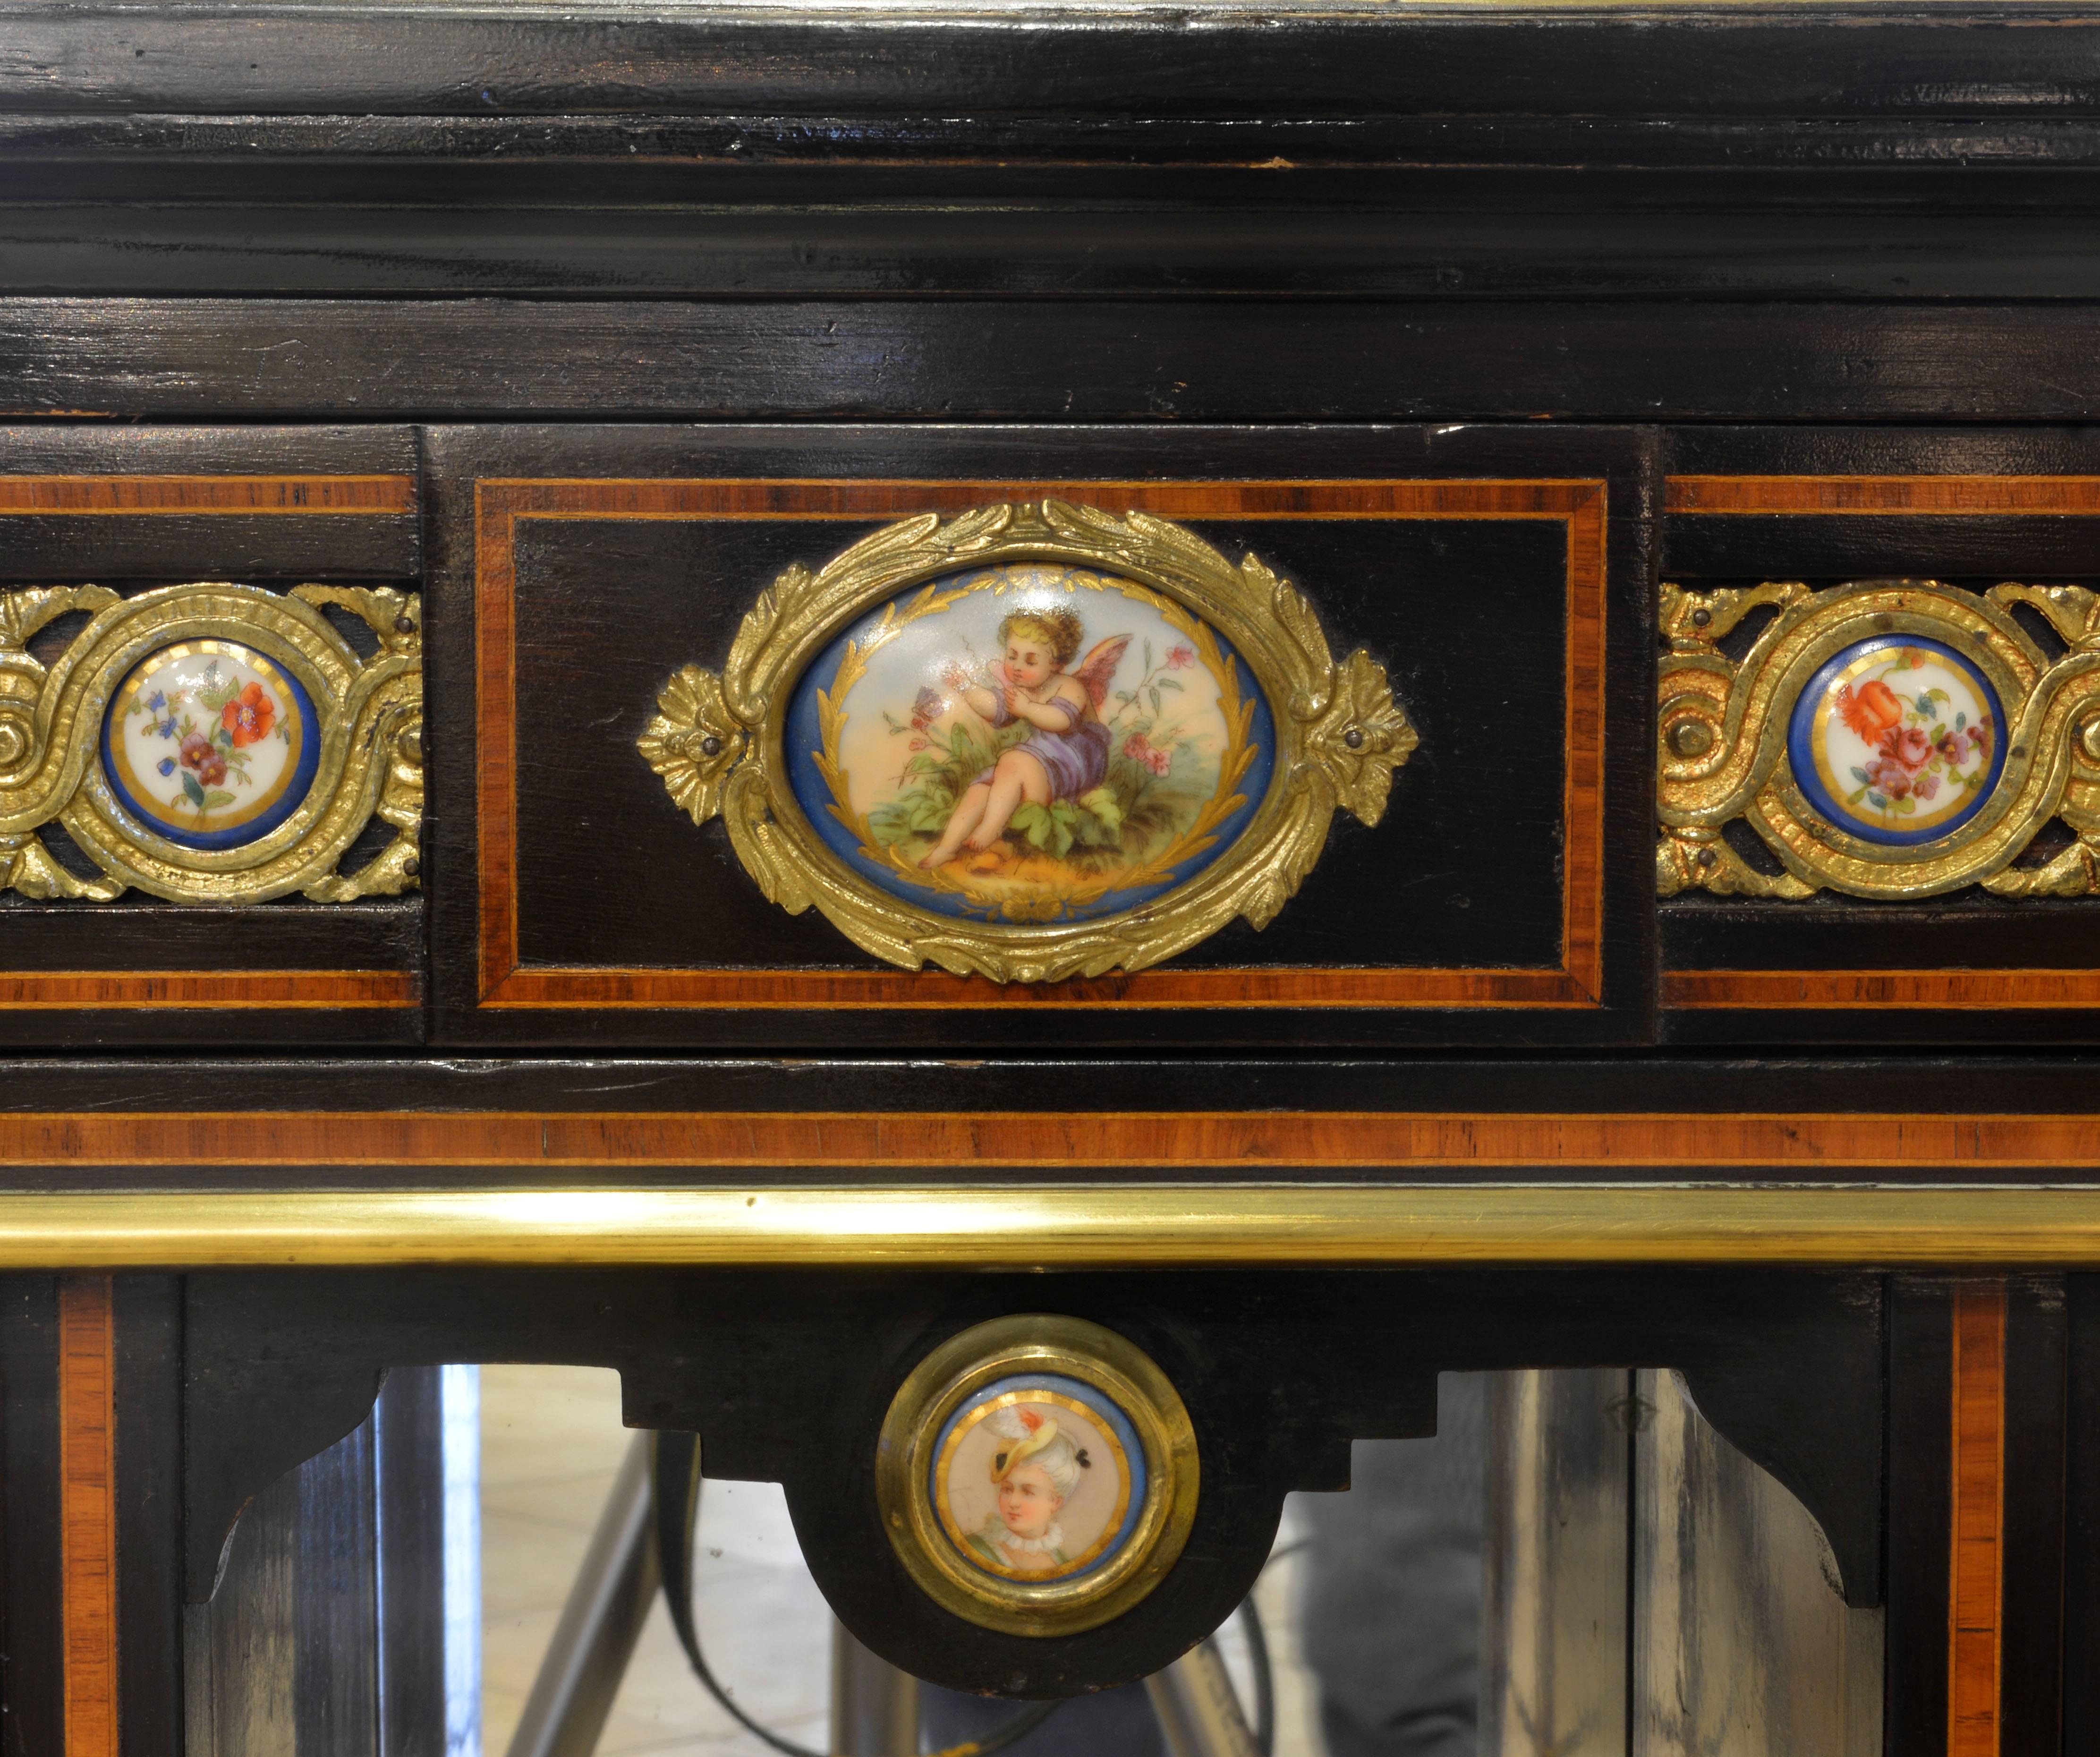 Bronze English 19th Cent. Ormolu and Sevres Plaque Mounted Inlaid Burl Walnut Credenza